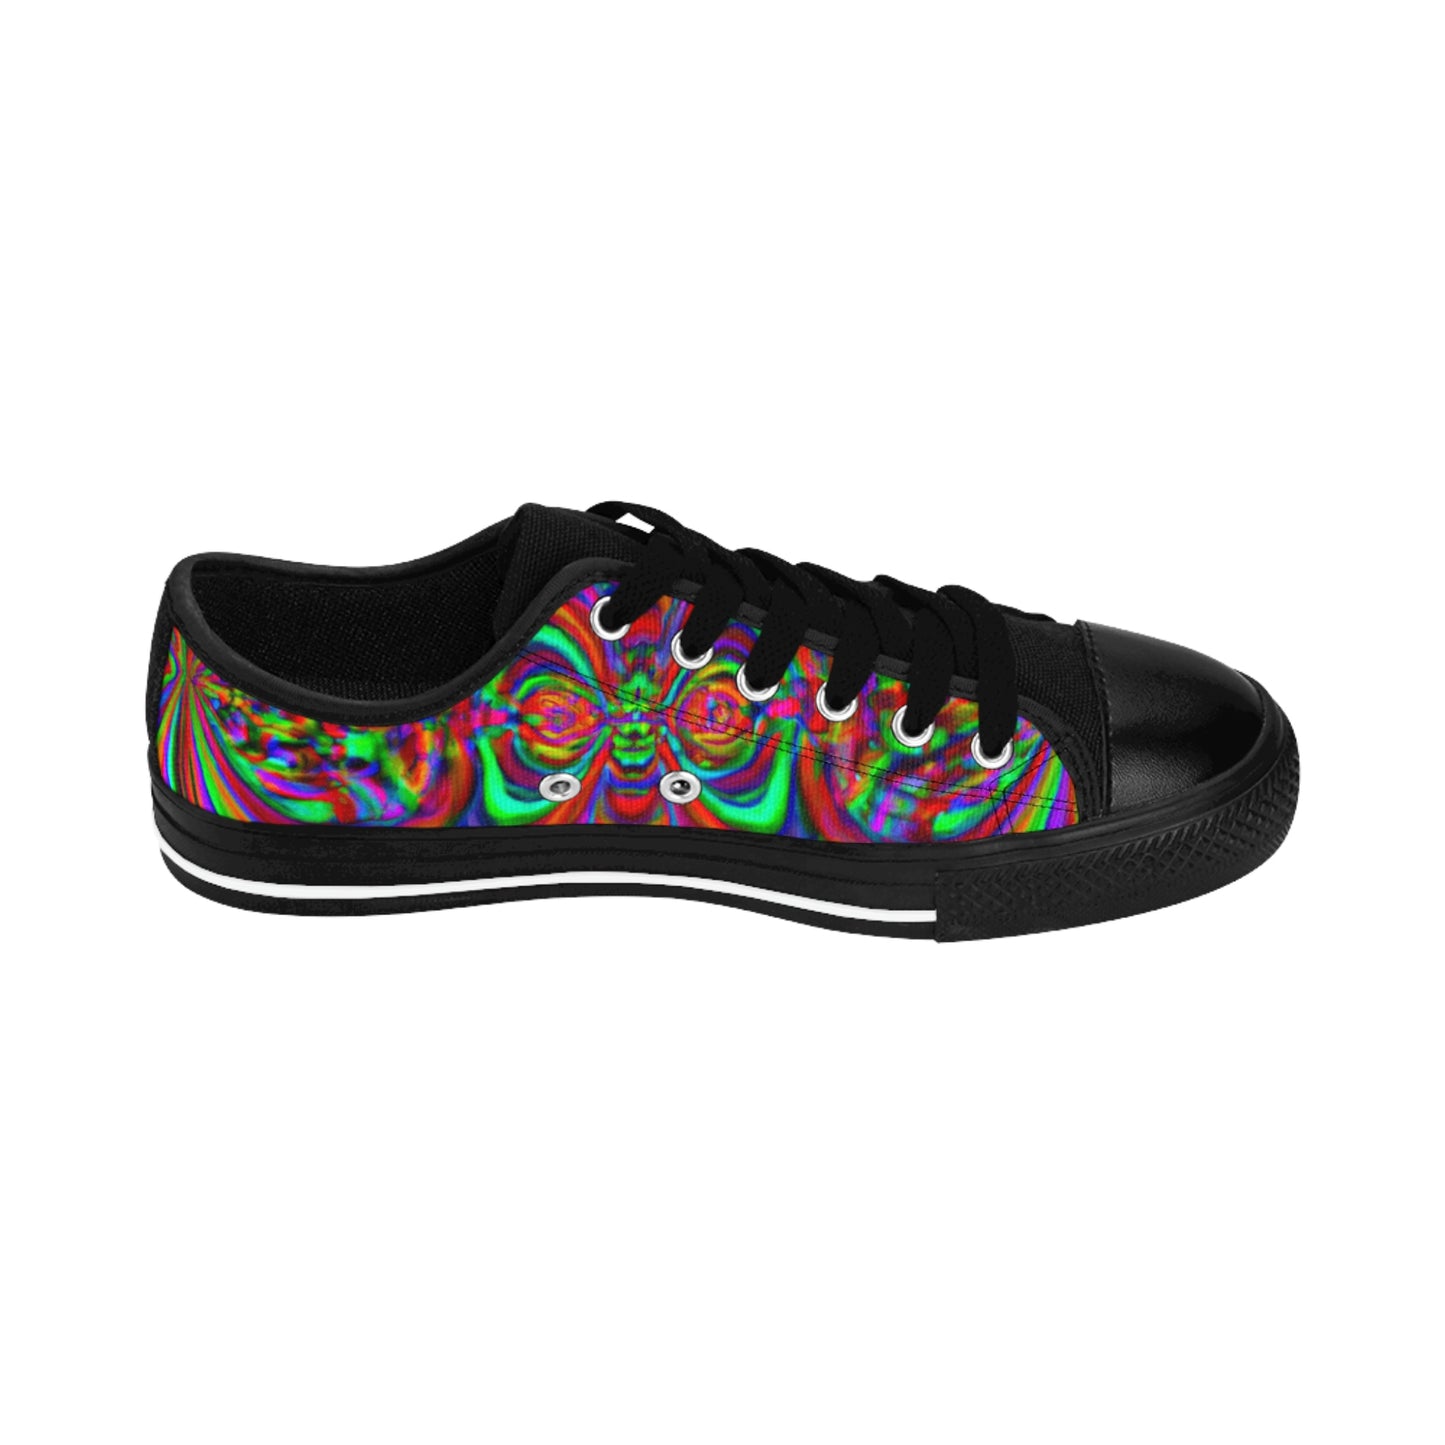 Silena the Shoe-Maker - Psychedelic Low Top